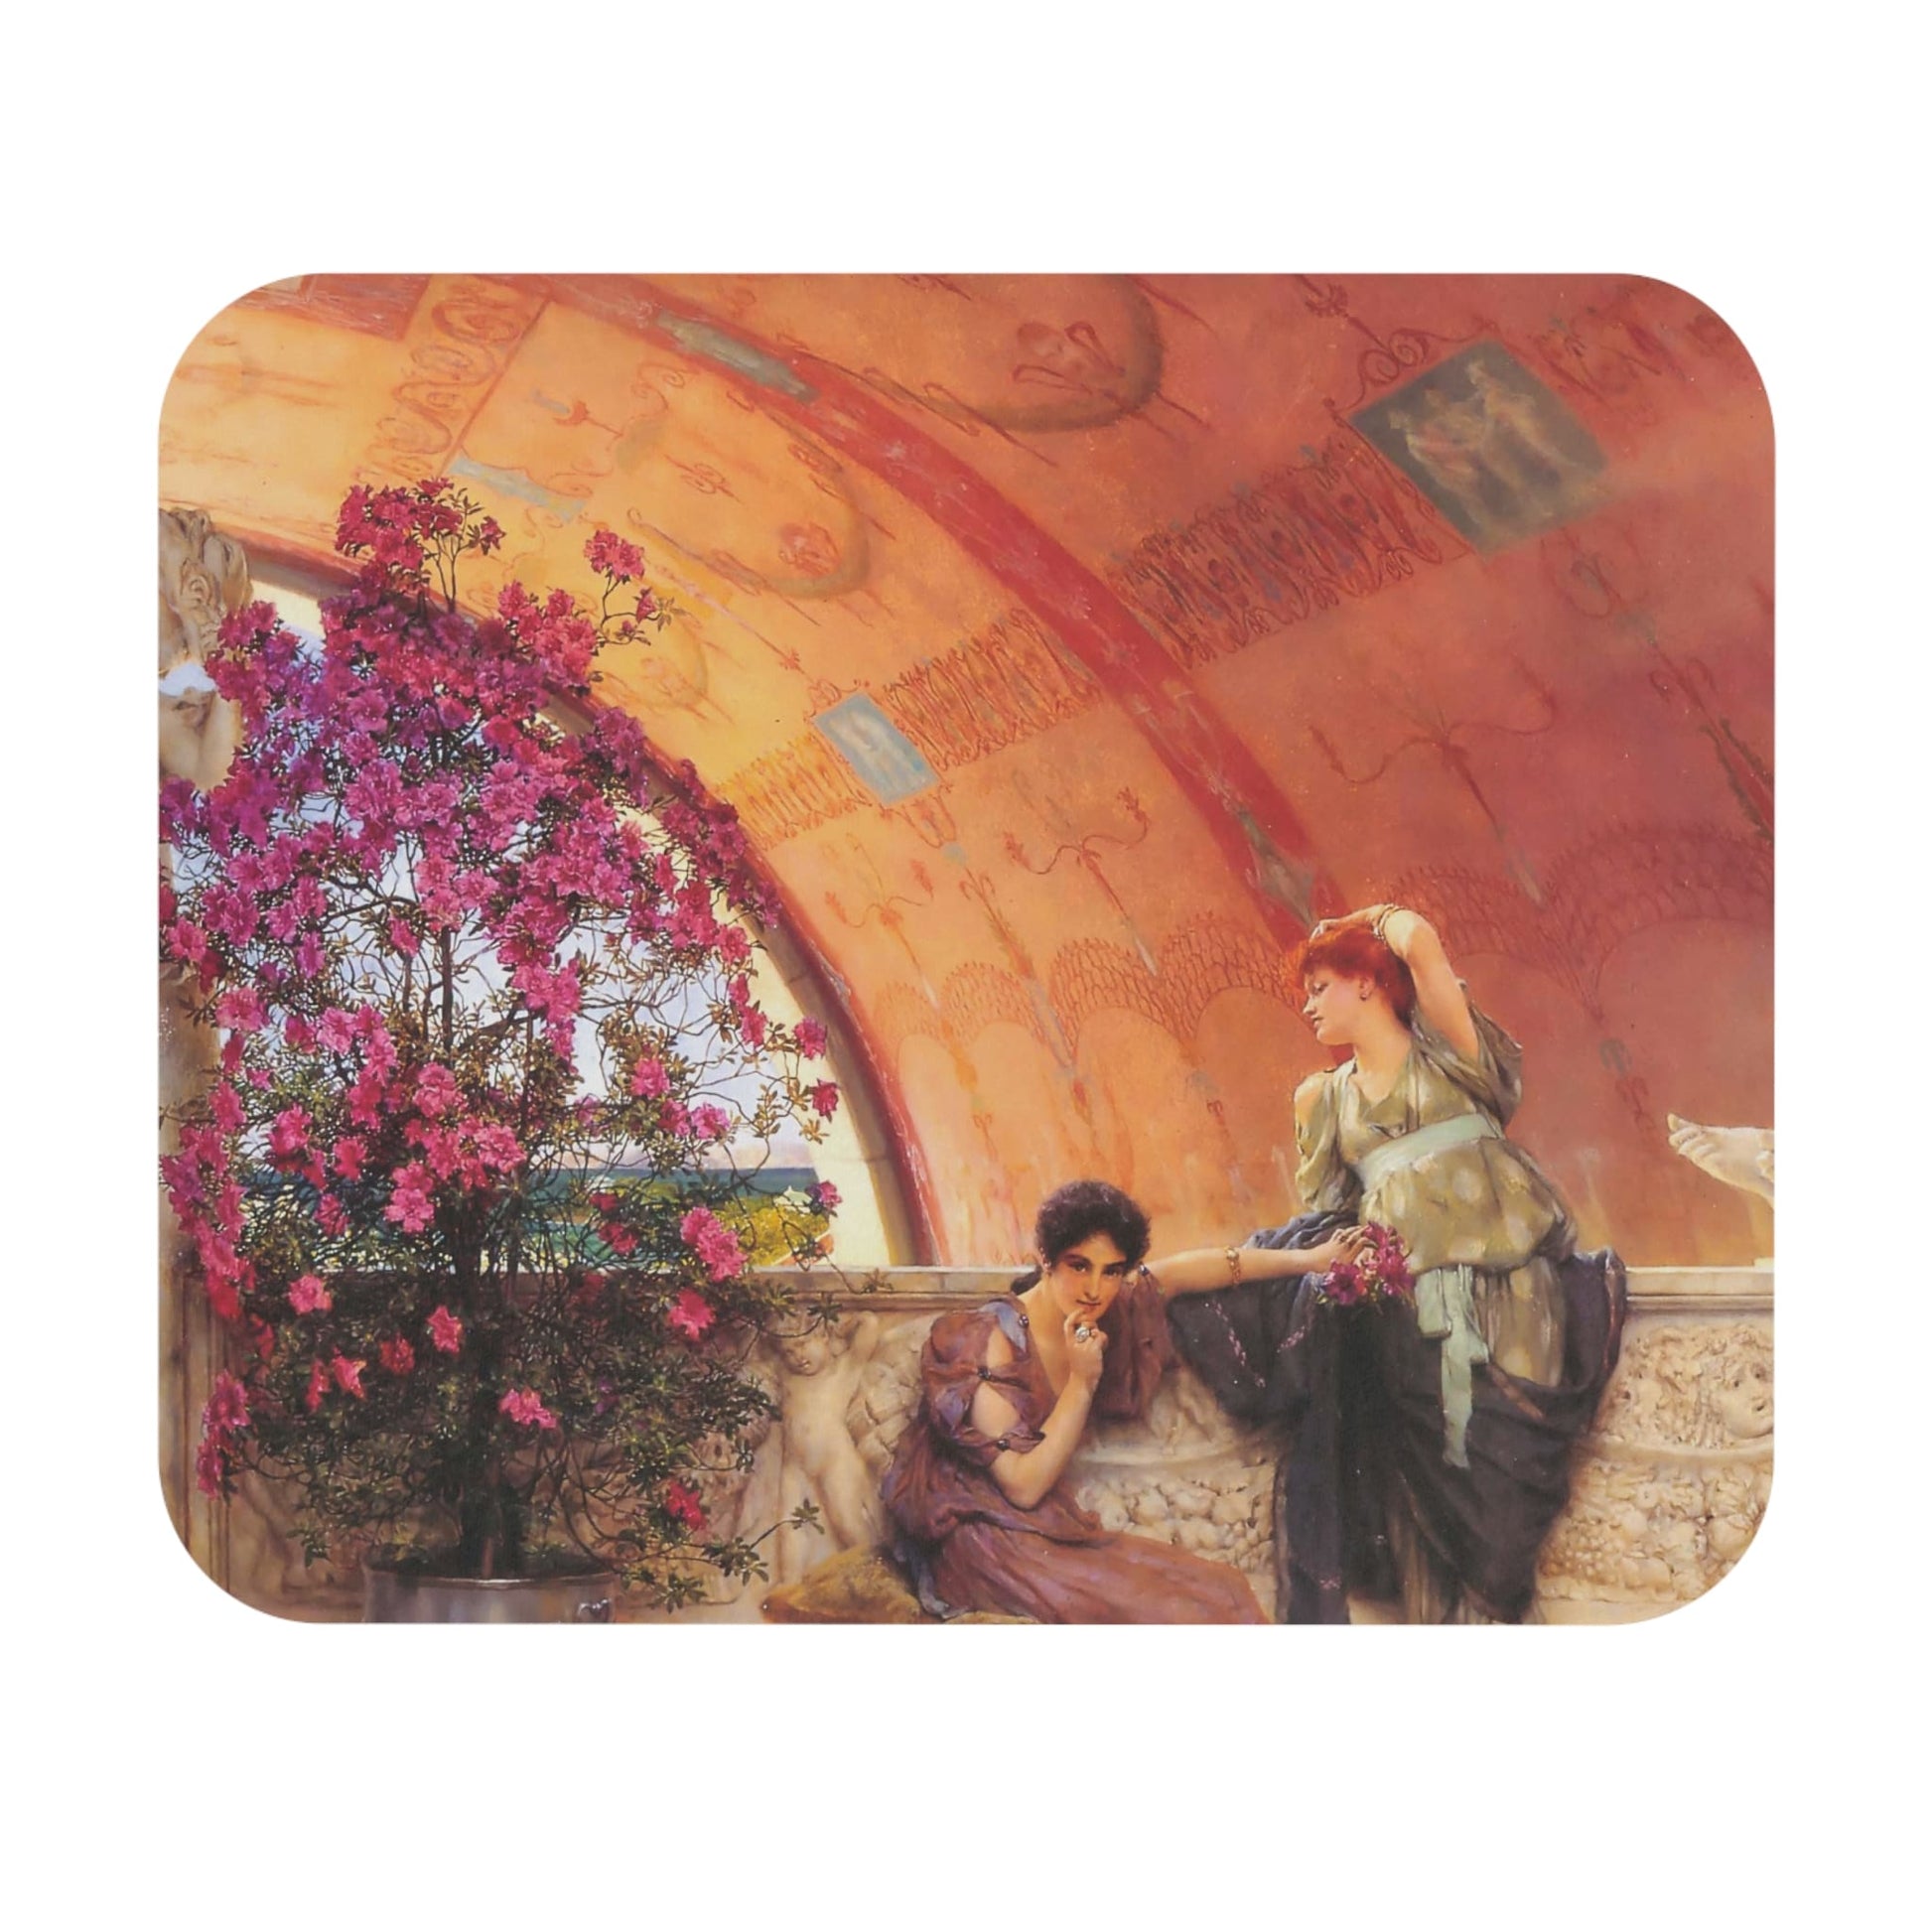 Bright Aesthetic European Mouse Pad with Victorian era art, desk and office decor featuring bright European artwork.